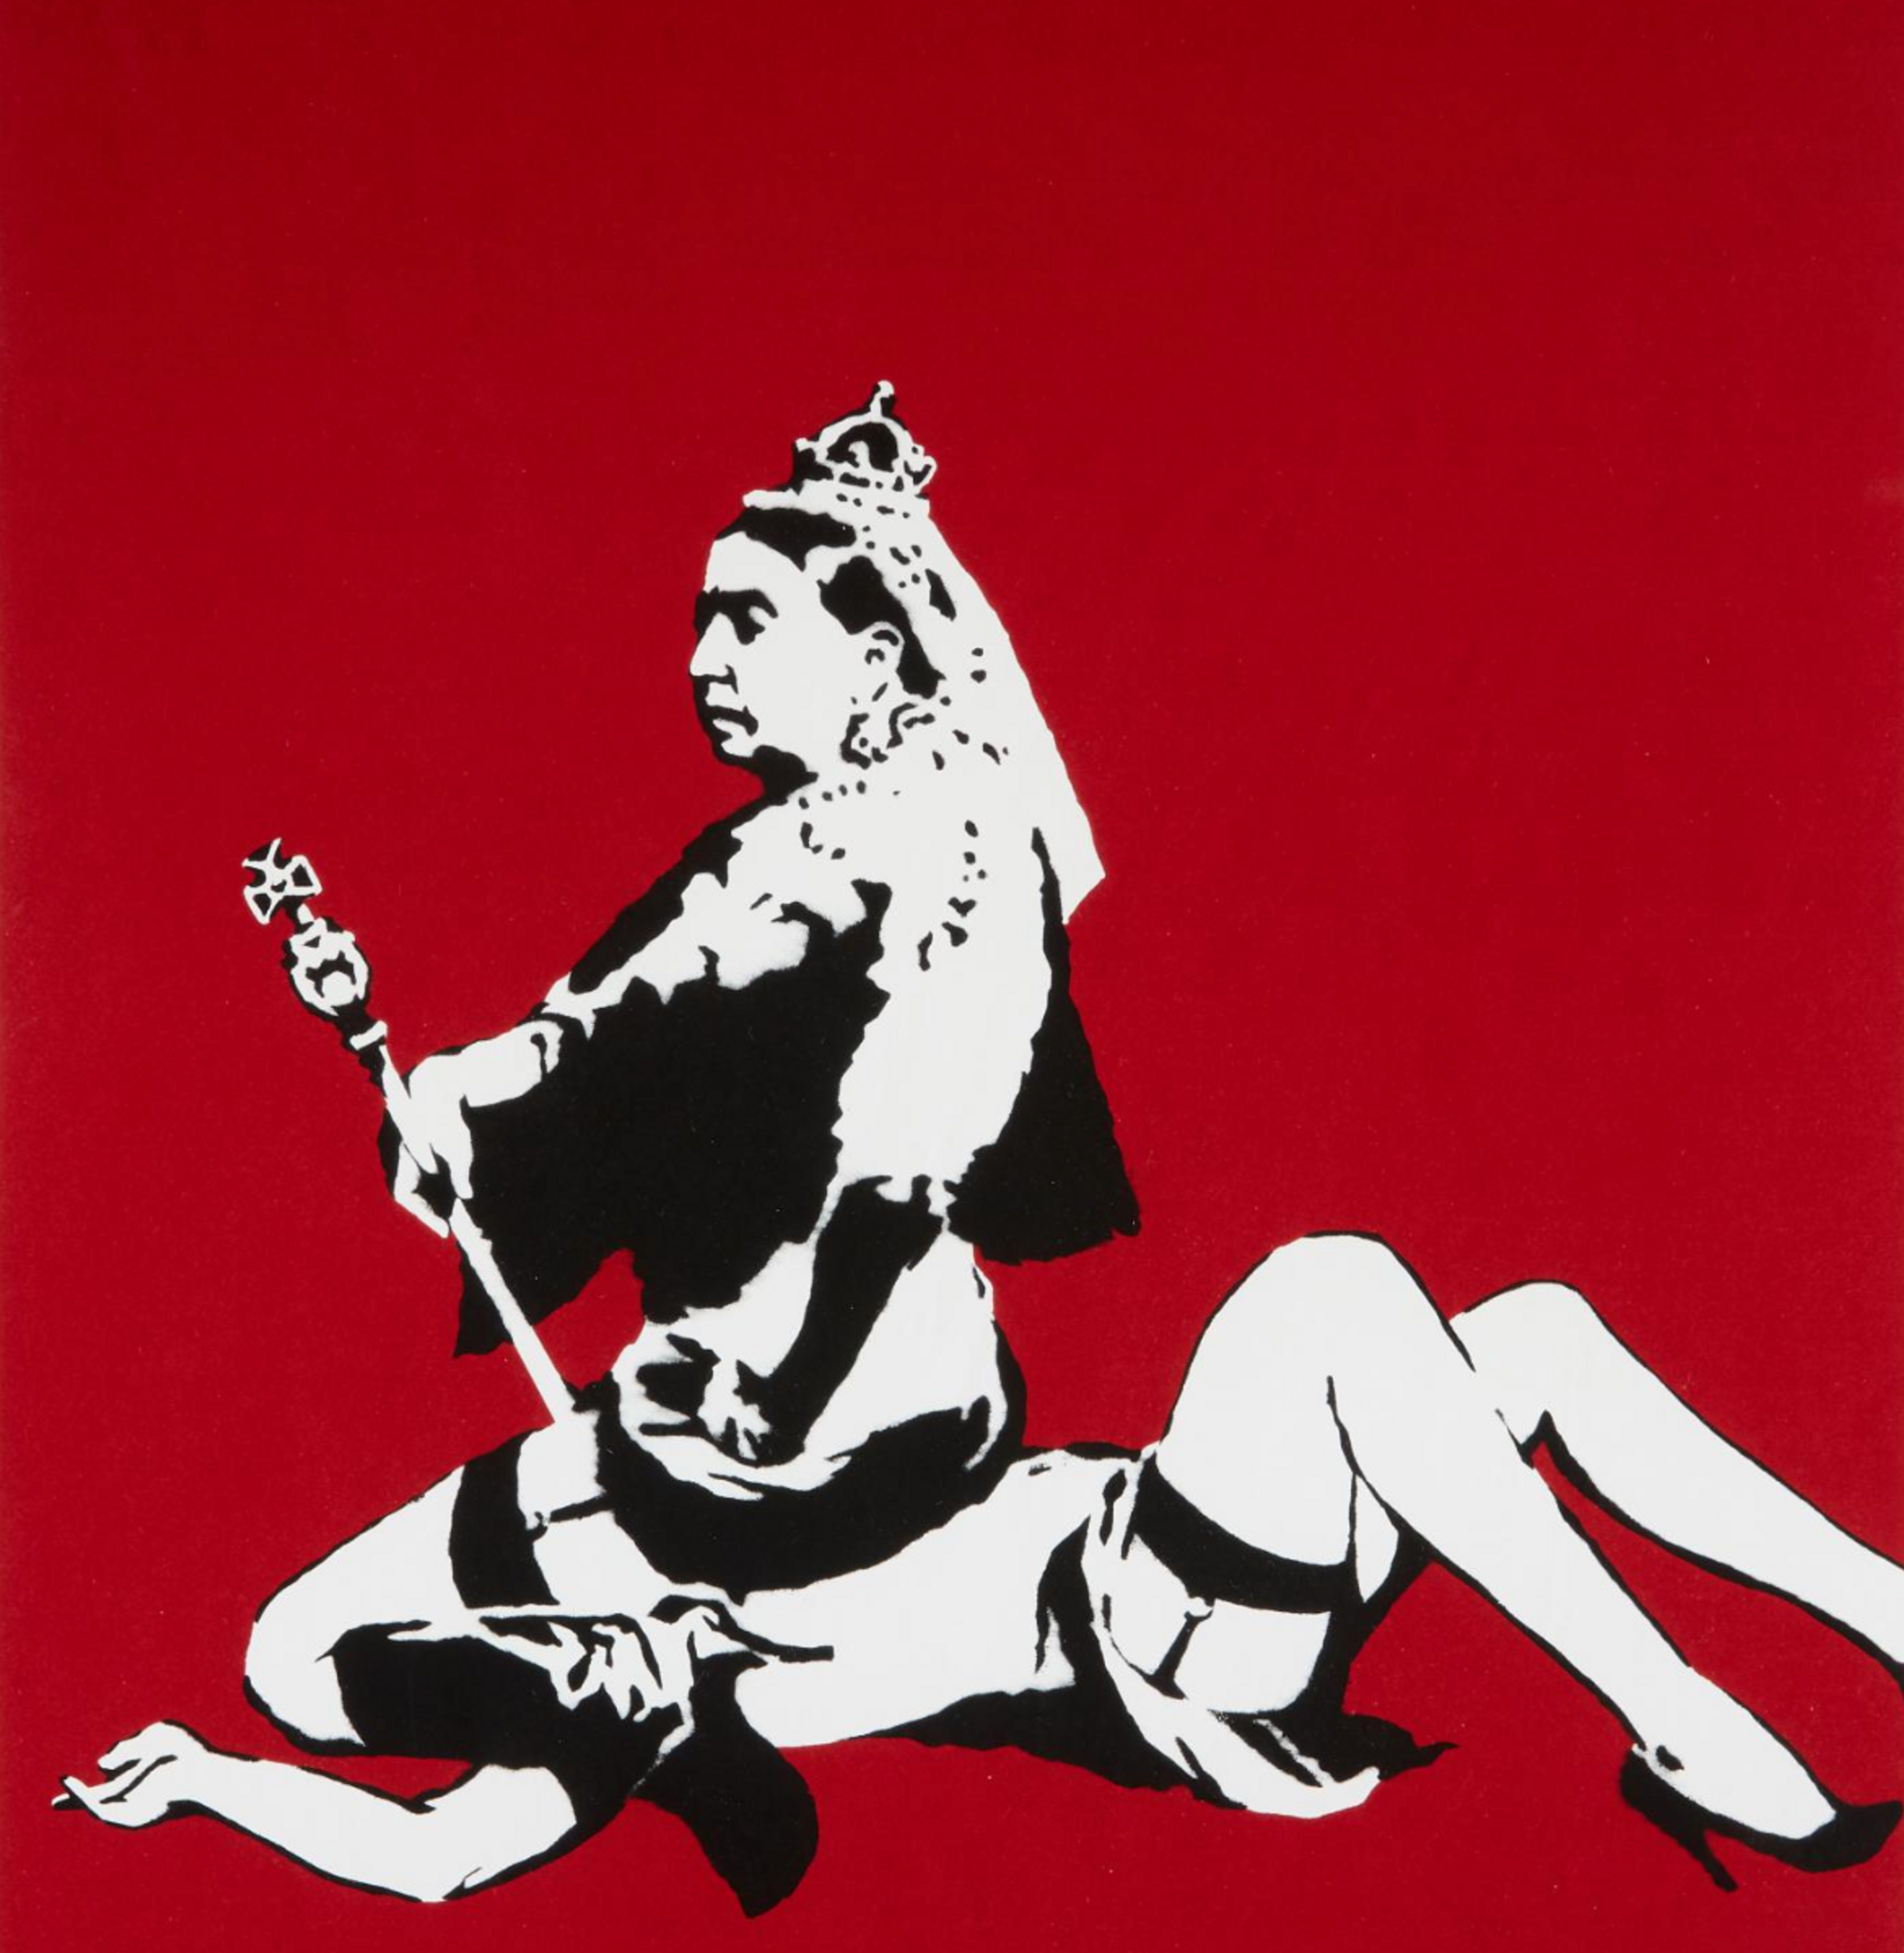 Banksy Queens: Graffiti and Anti-Monarchy